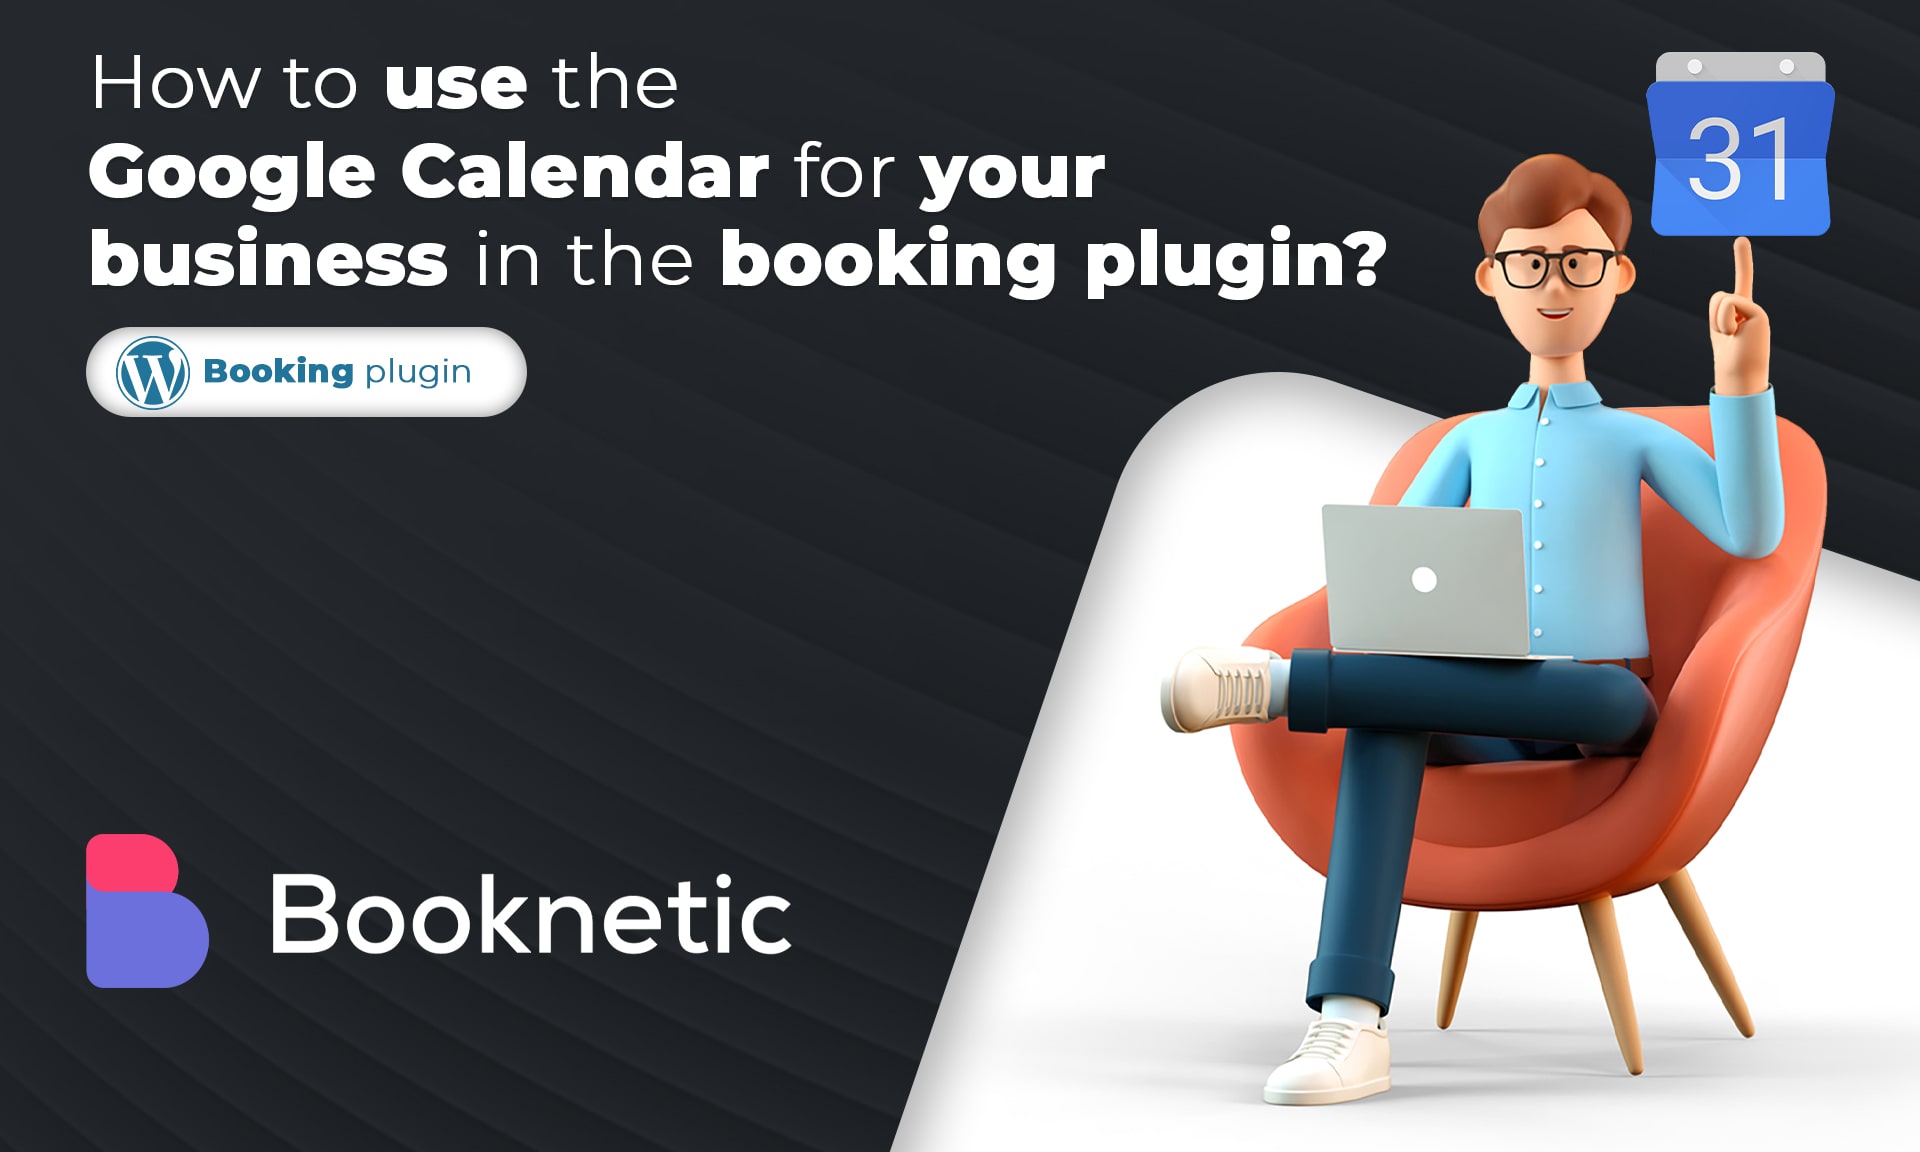 How To Use The Google Calendar for Your Business in The Booking Plugin